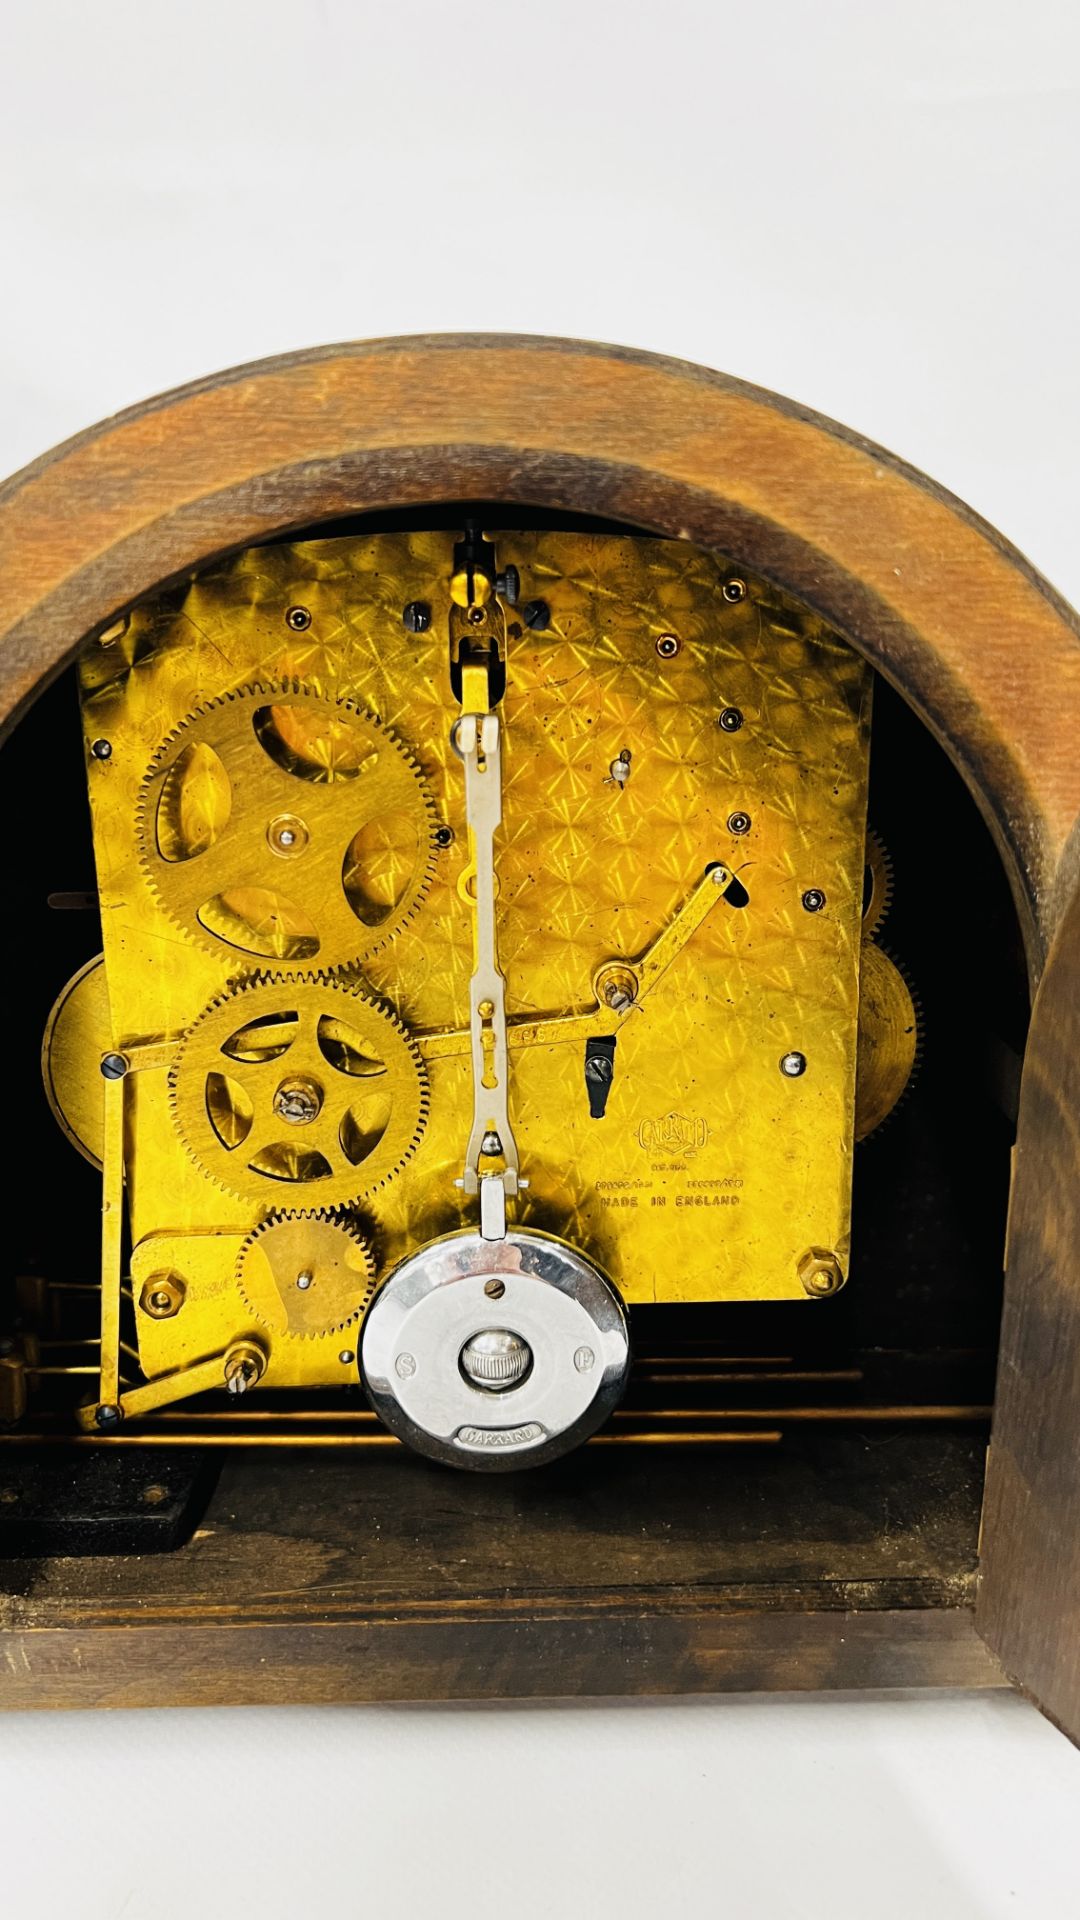 A GARROD 8 DAY MANTEL CLOCK ALONG WITH AN 8 DAY CARRIAGE CLOCK. - Image 6 of 7